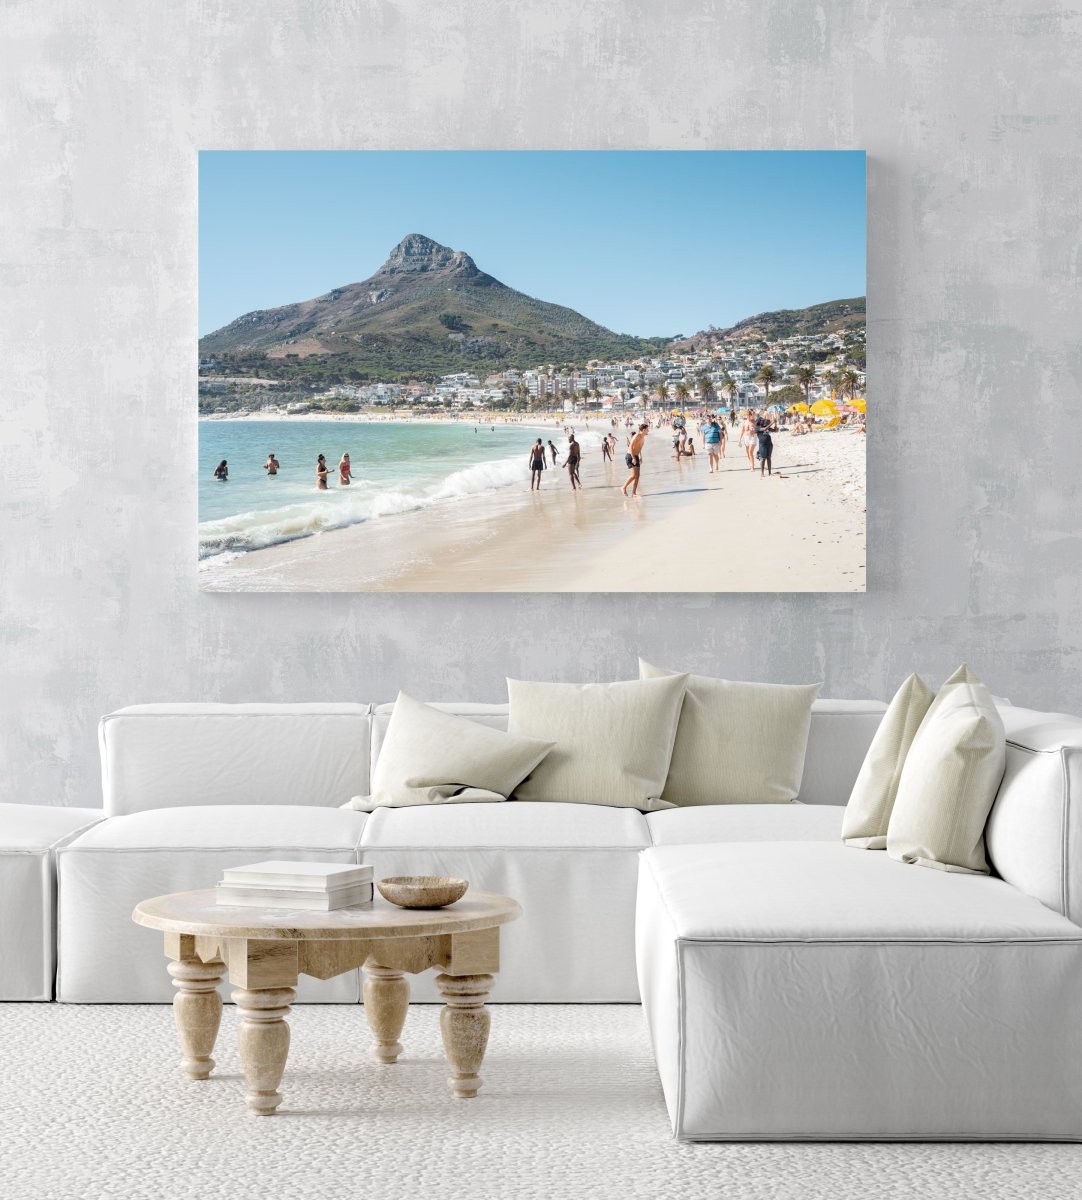 People swimming and playing on Camps Bay Beach below the lions head in an acrylic/perspex frame